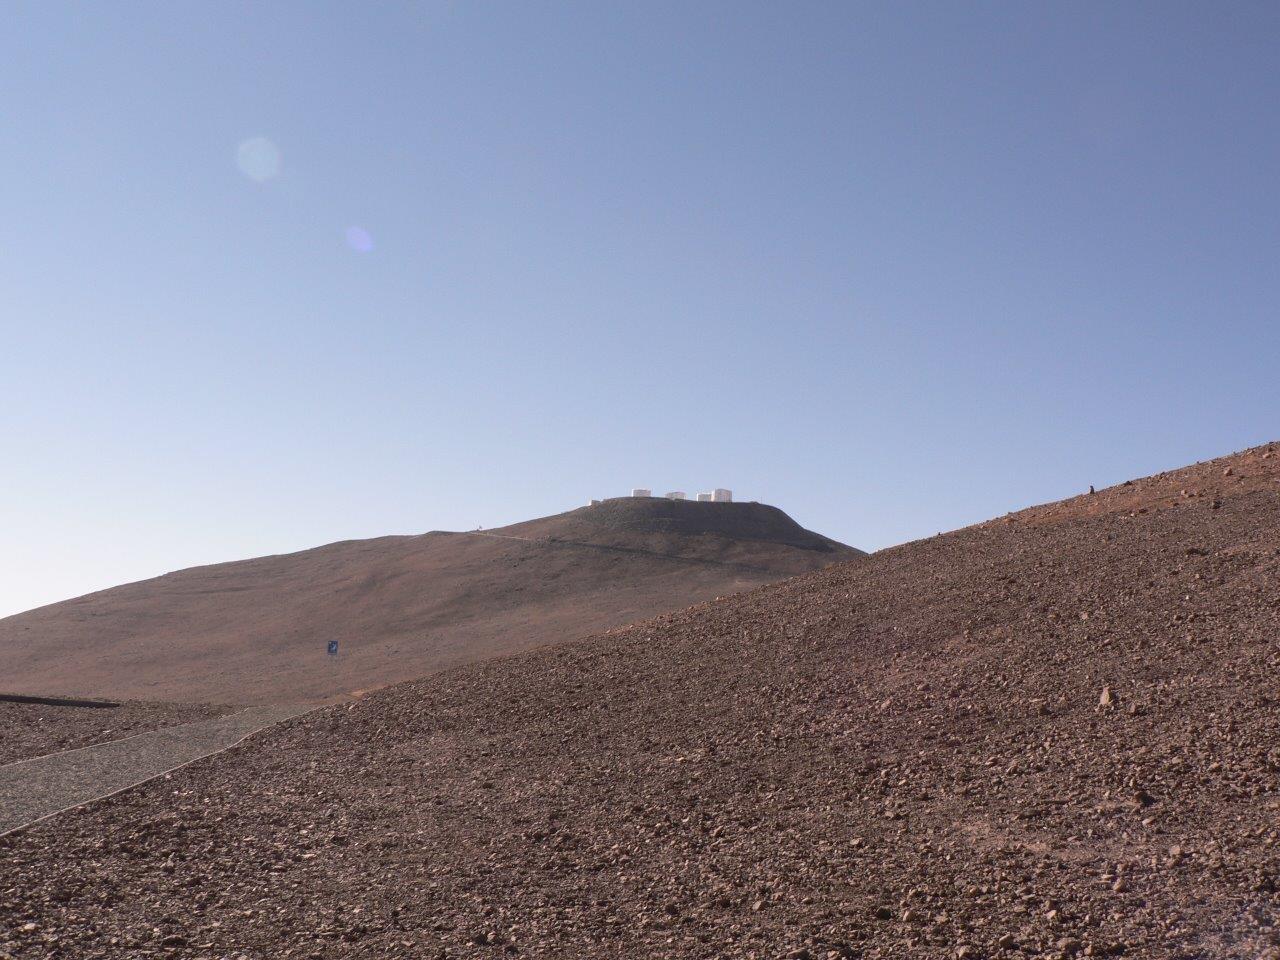 Mount Paranal and the Very Large Telescope in Chile